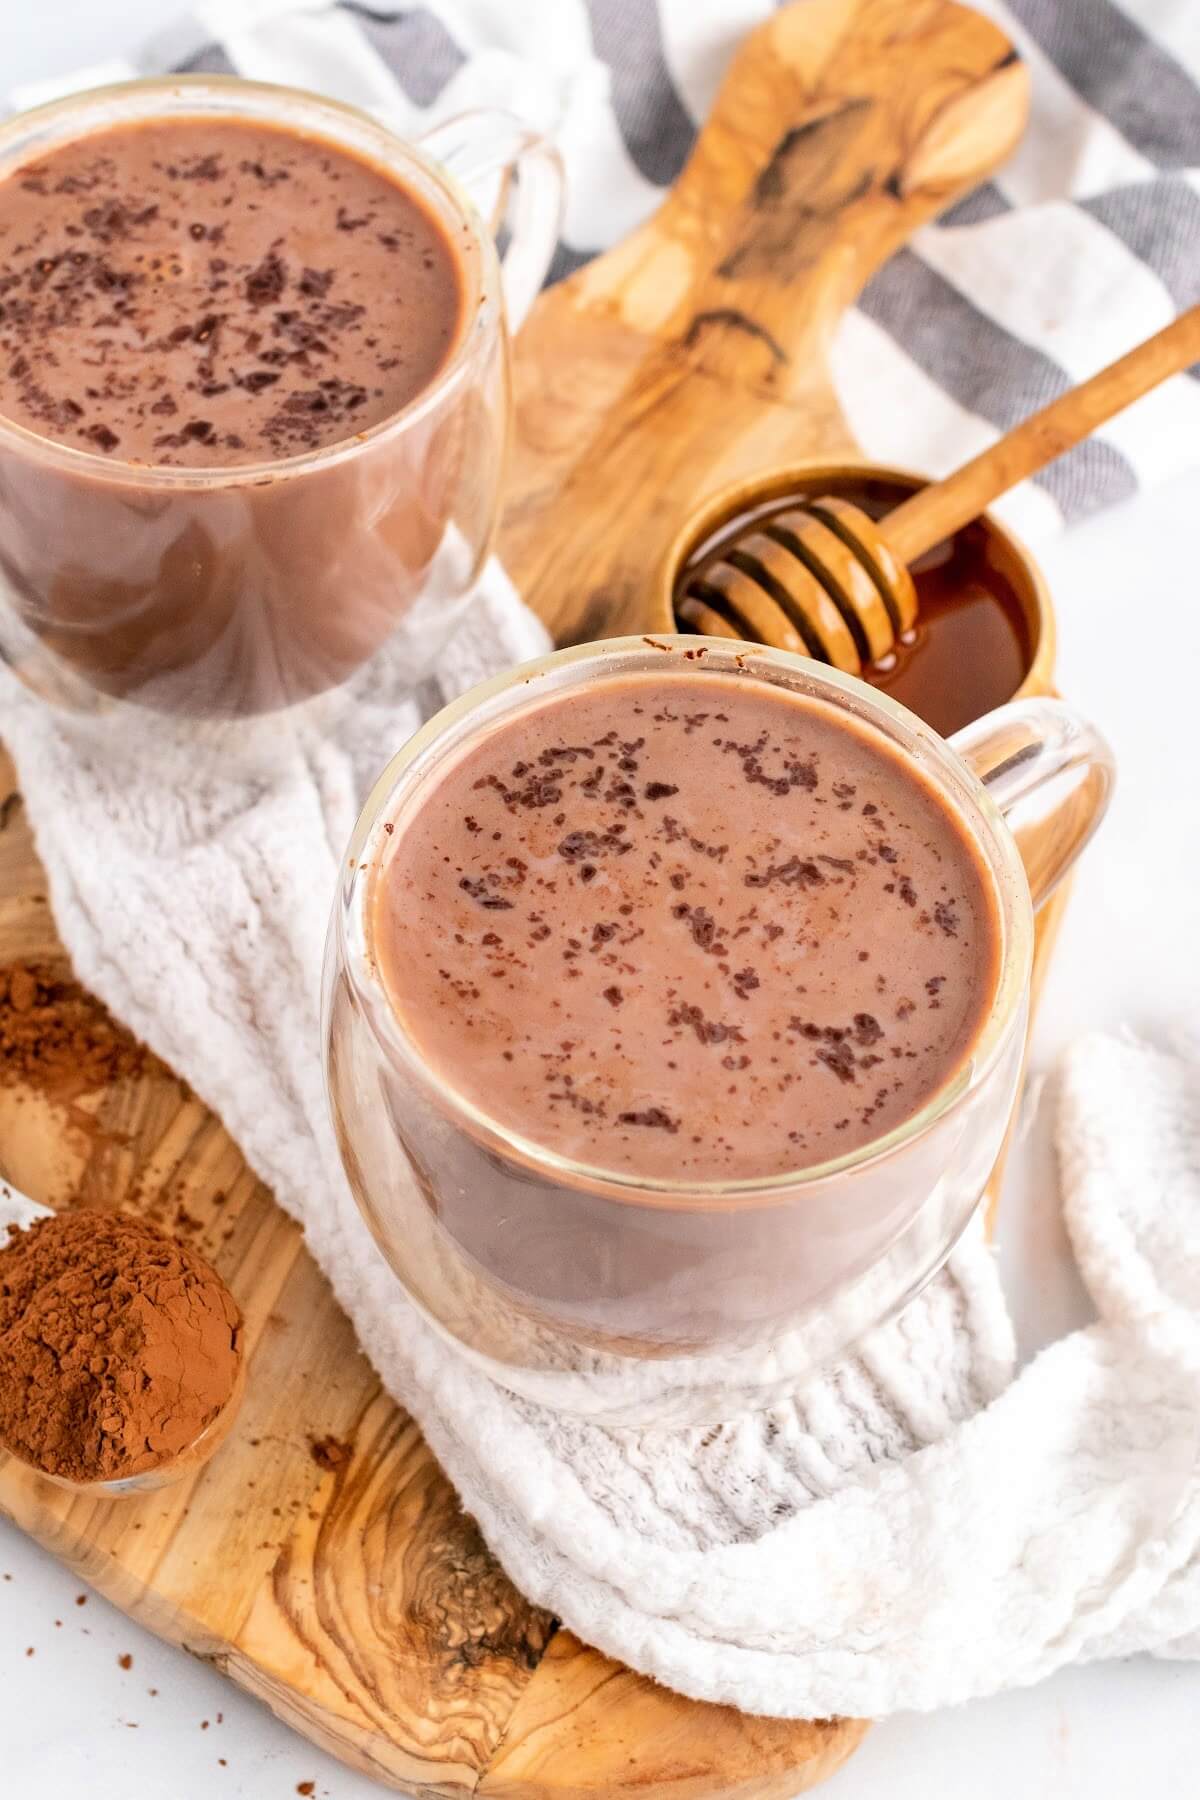 Two glass mugs filled with hot chocolate topped with chocolate shavings sitting on top of a cloth kitchen towel on top of a wooden cutting board next to a spoon full of cocoa powder and a small bowl full of honey with a honey dipper next to the hot chocolates.